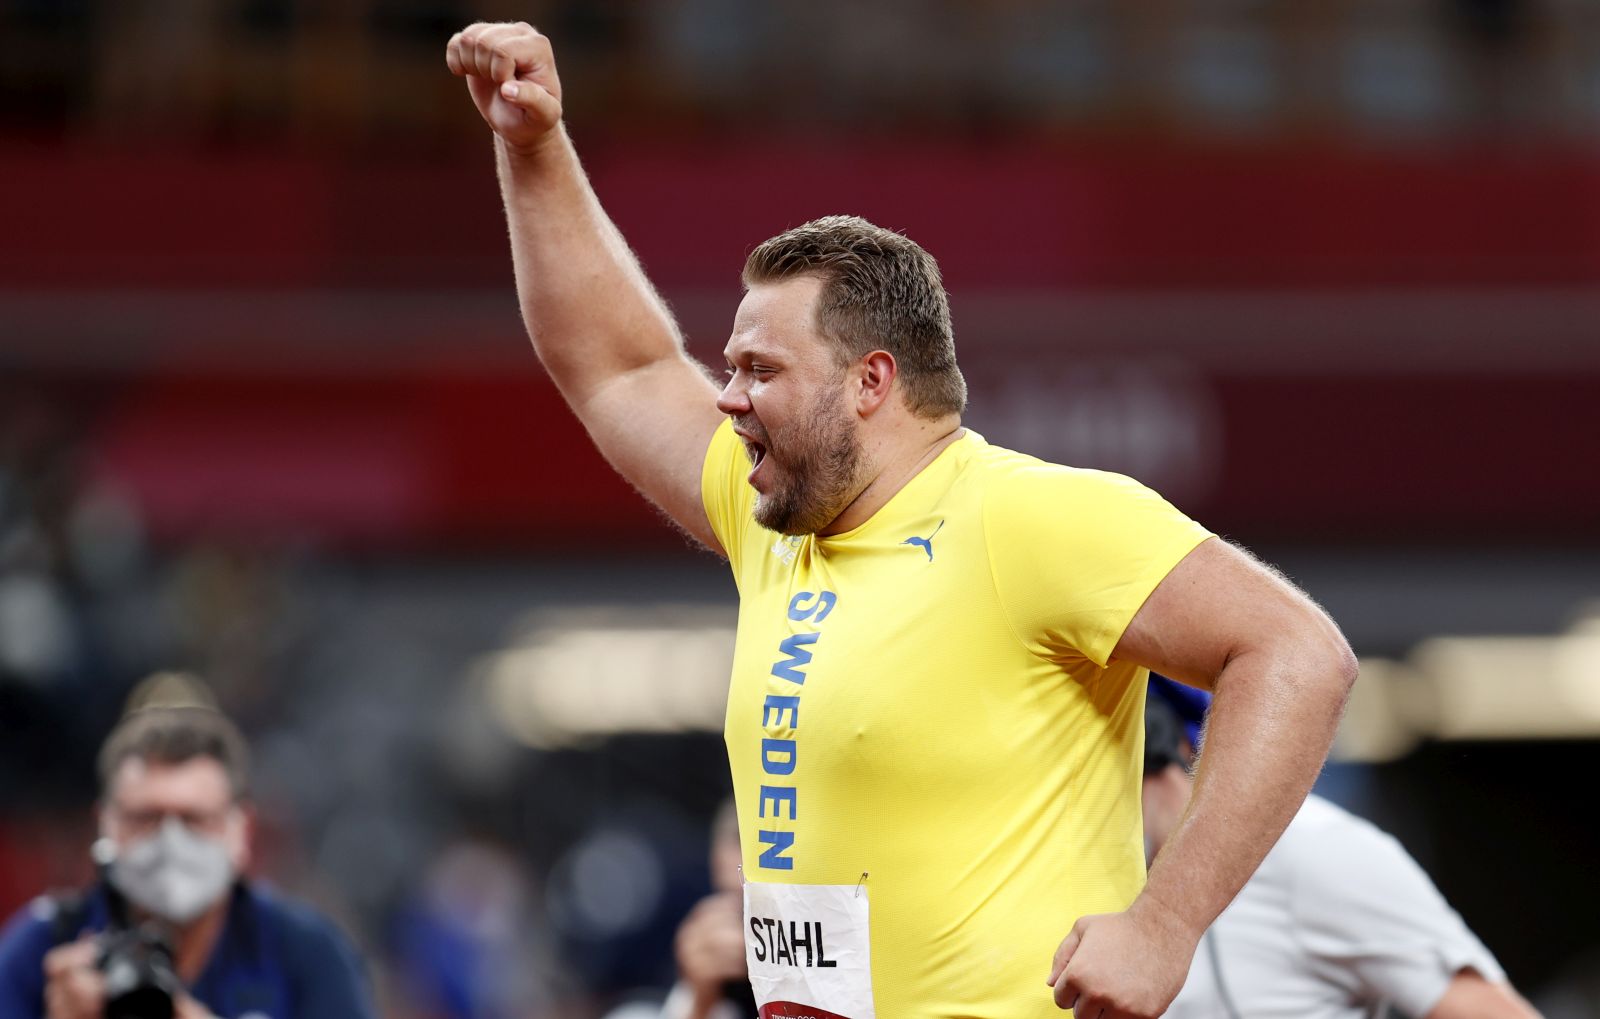 epa09382743 Daniel Stahl of Sweden celebrates after winning the gold medal during the Men's Discus throw Final round in the Athletics events of the Tokyo 2020 Olympic Games at the Olympic Stadium in Tokyo, Japan, 31 July 2021.  EPA/JEON HEON-KYUN